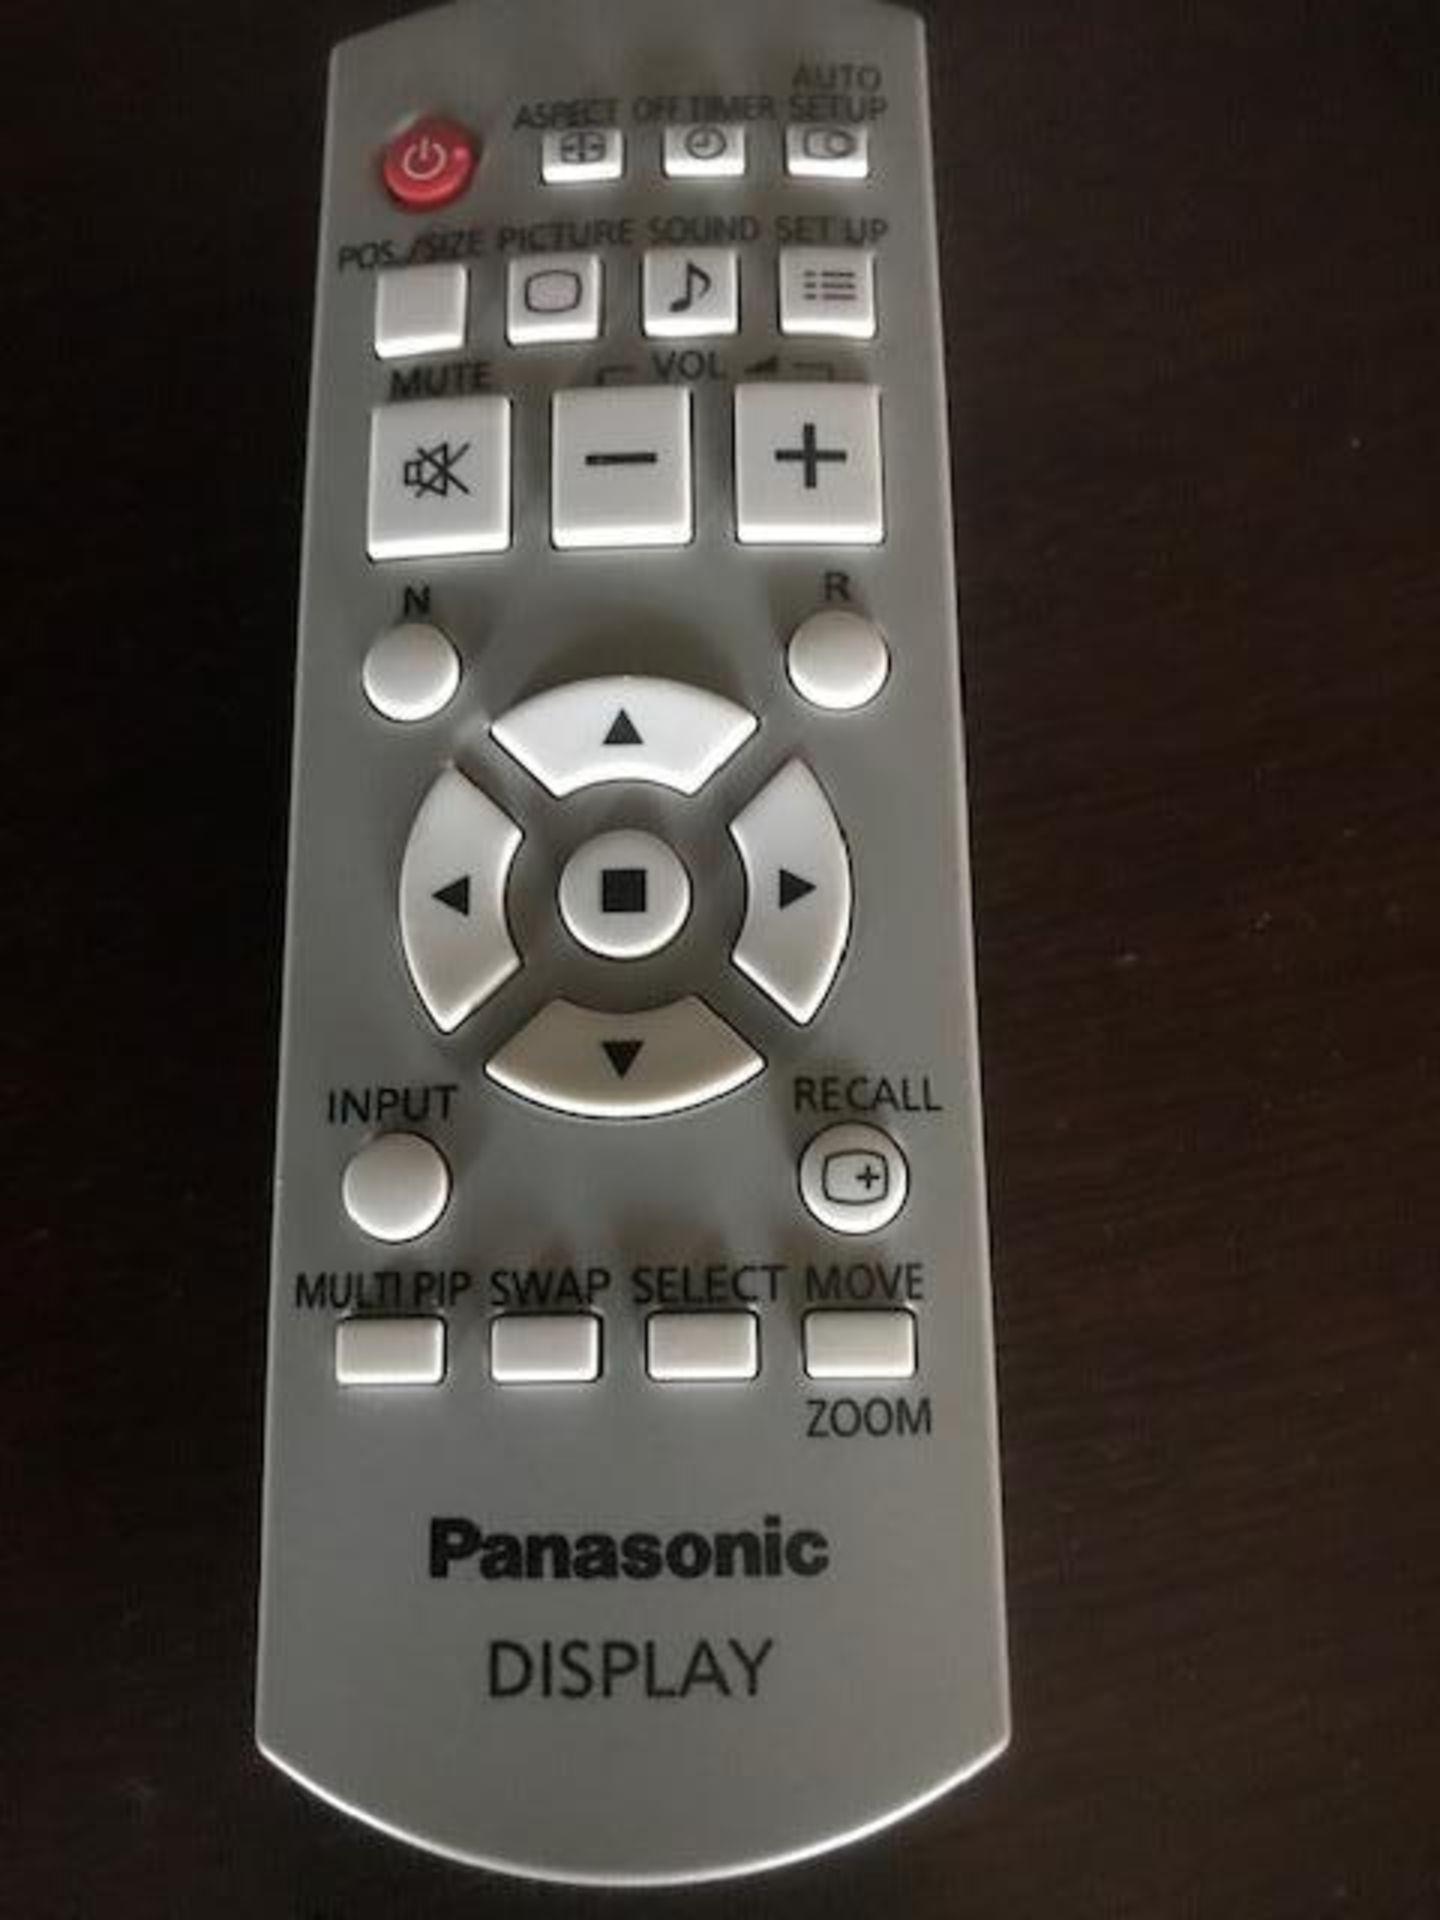 Panasonic Plasma Display 65" Model TH-65PF12 w/remote with side mount speakers - Image 3 of 4